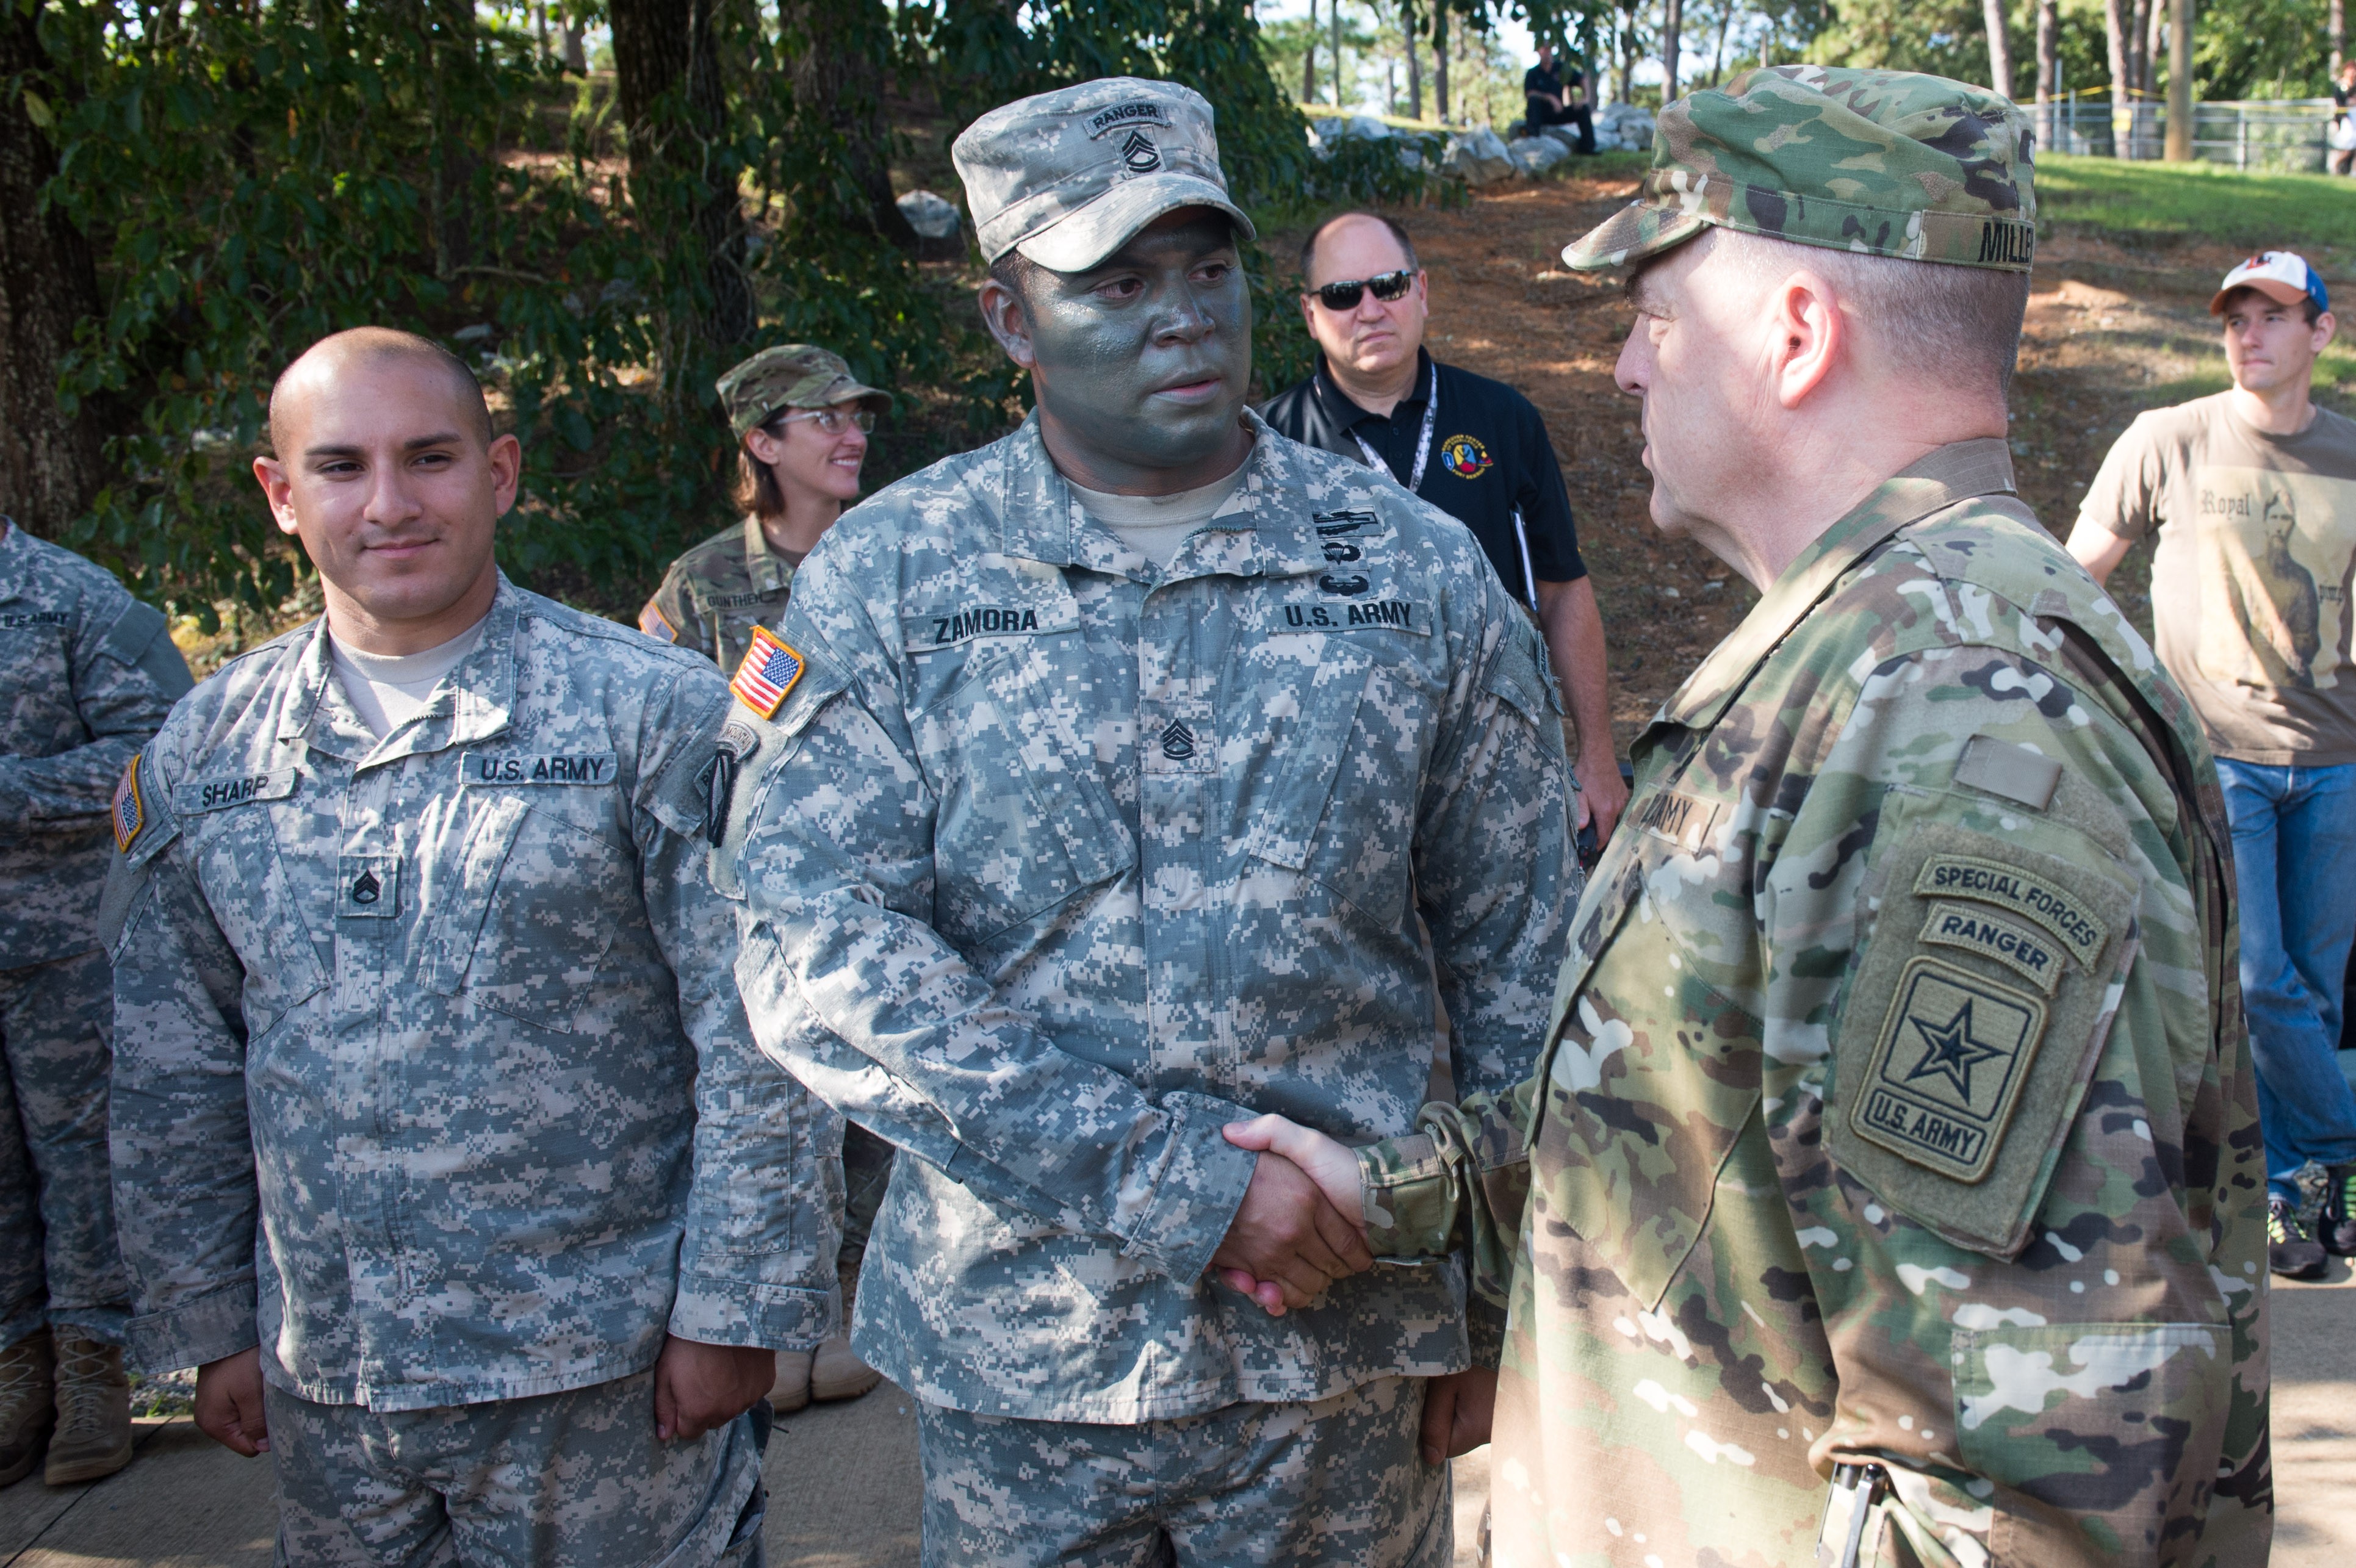 Army Chief of Staff Attends Ranger School Graduation Article The